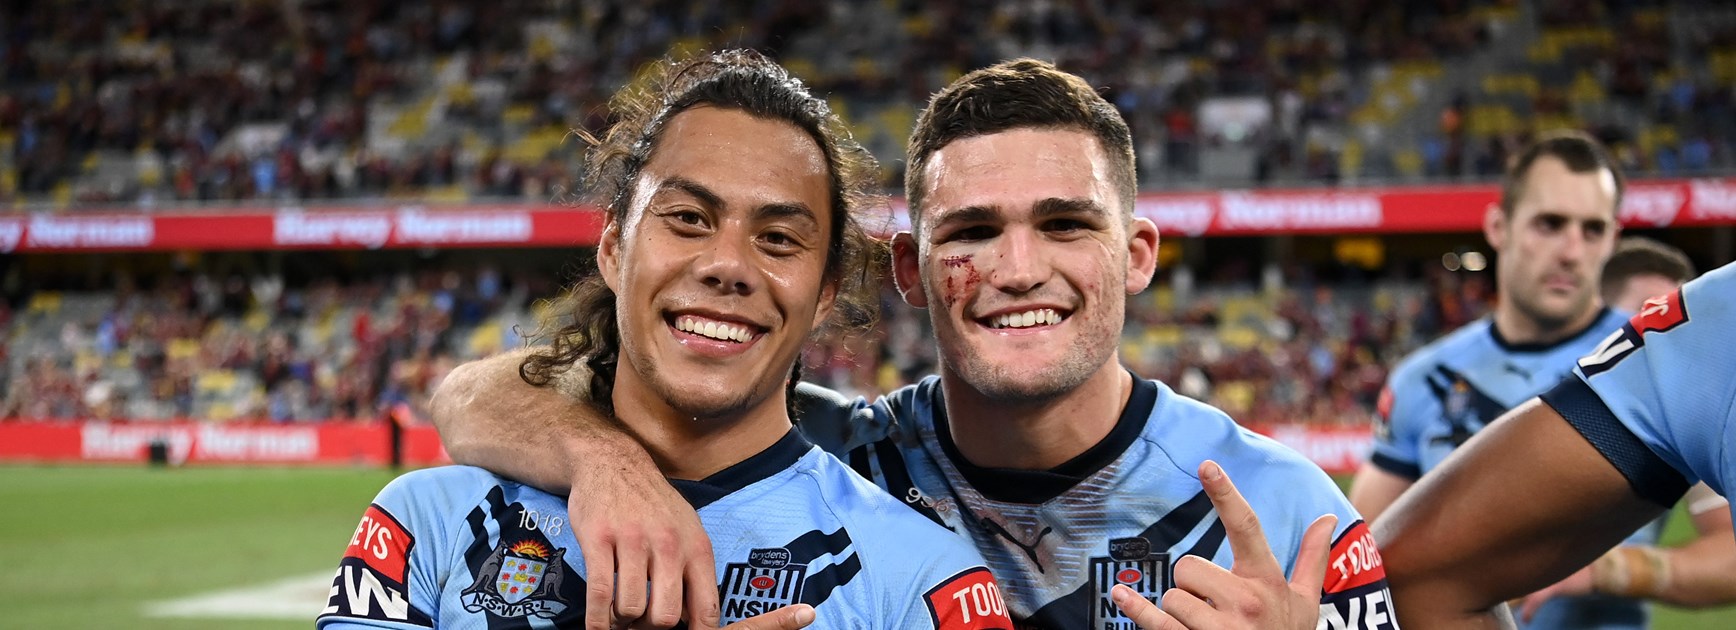 Luai lifts lid on "cool" Cleary connection